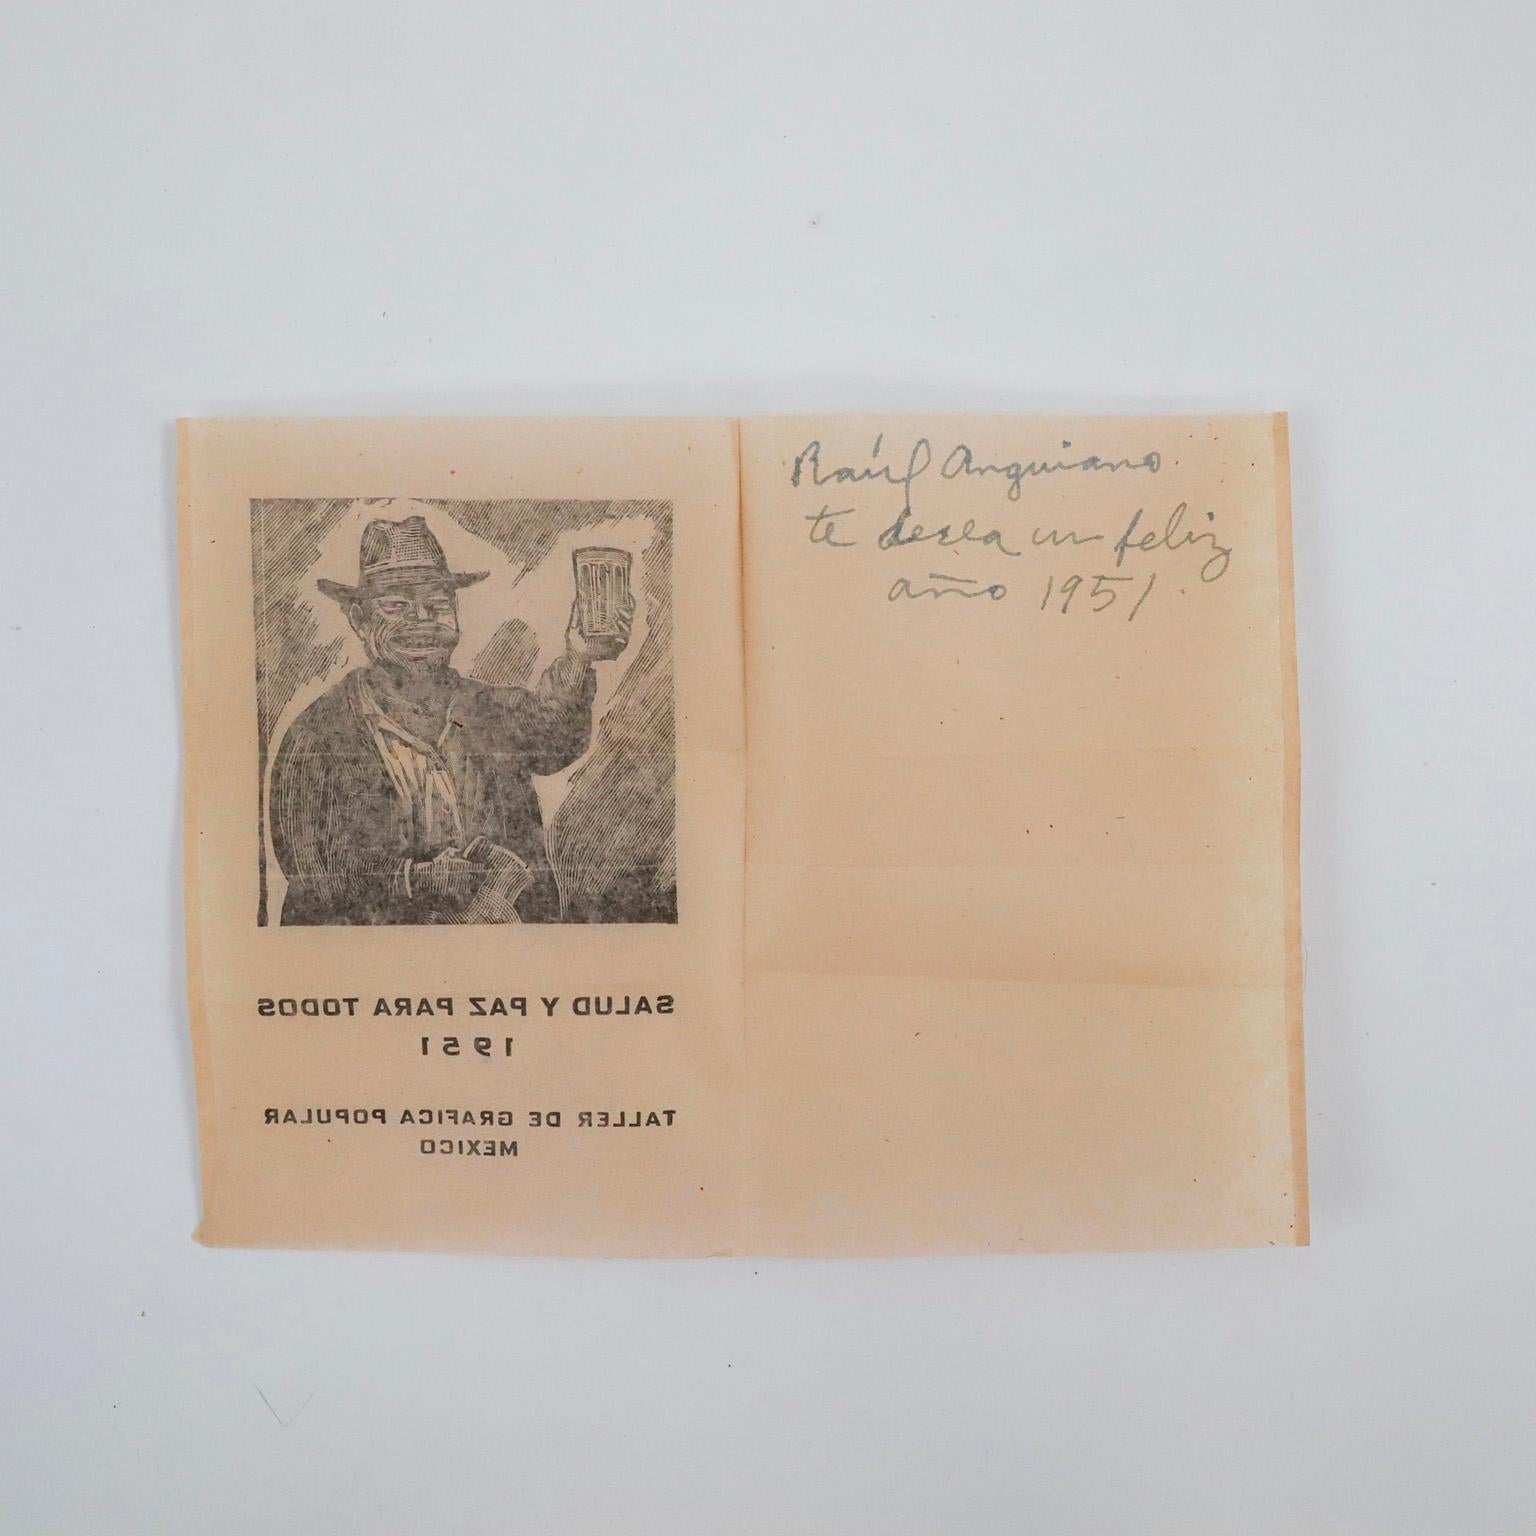 Other Antique Postcard Signed by Raul Anguiano, 1951